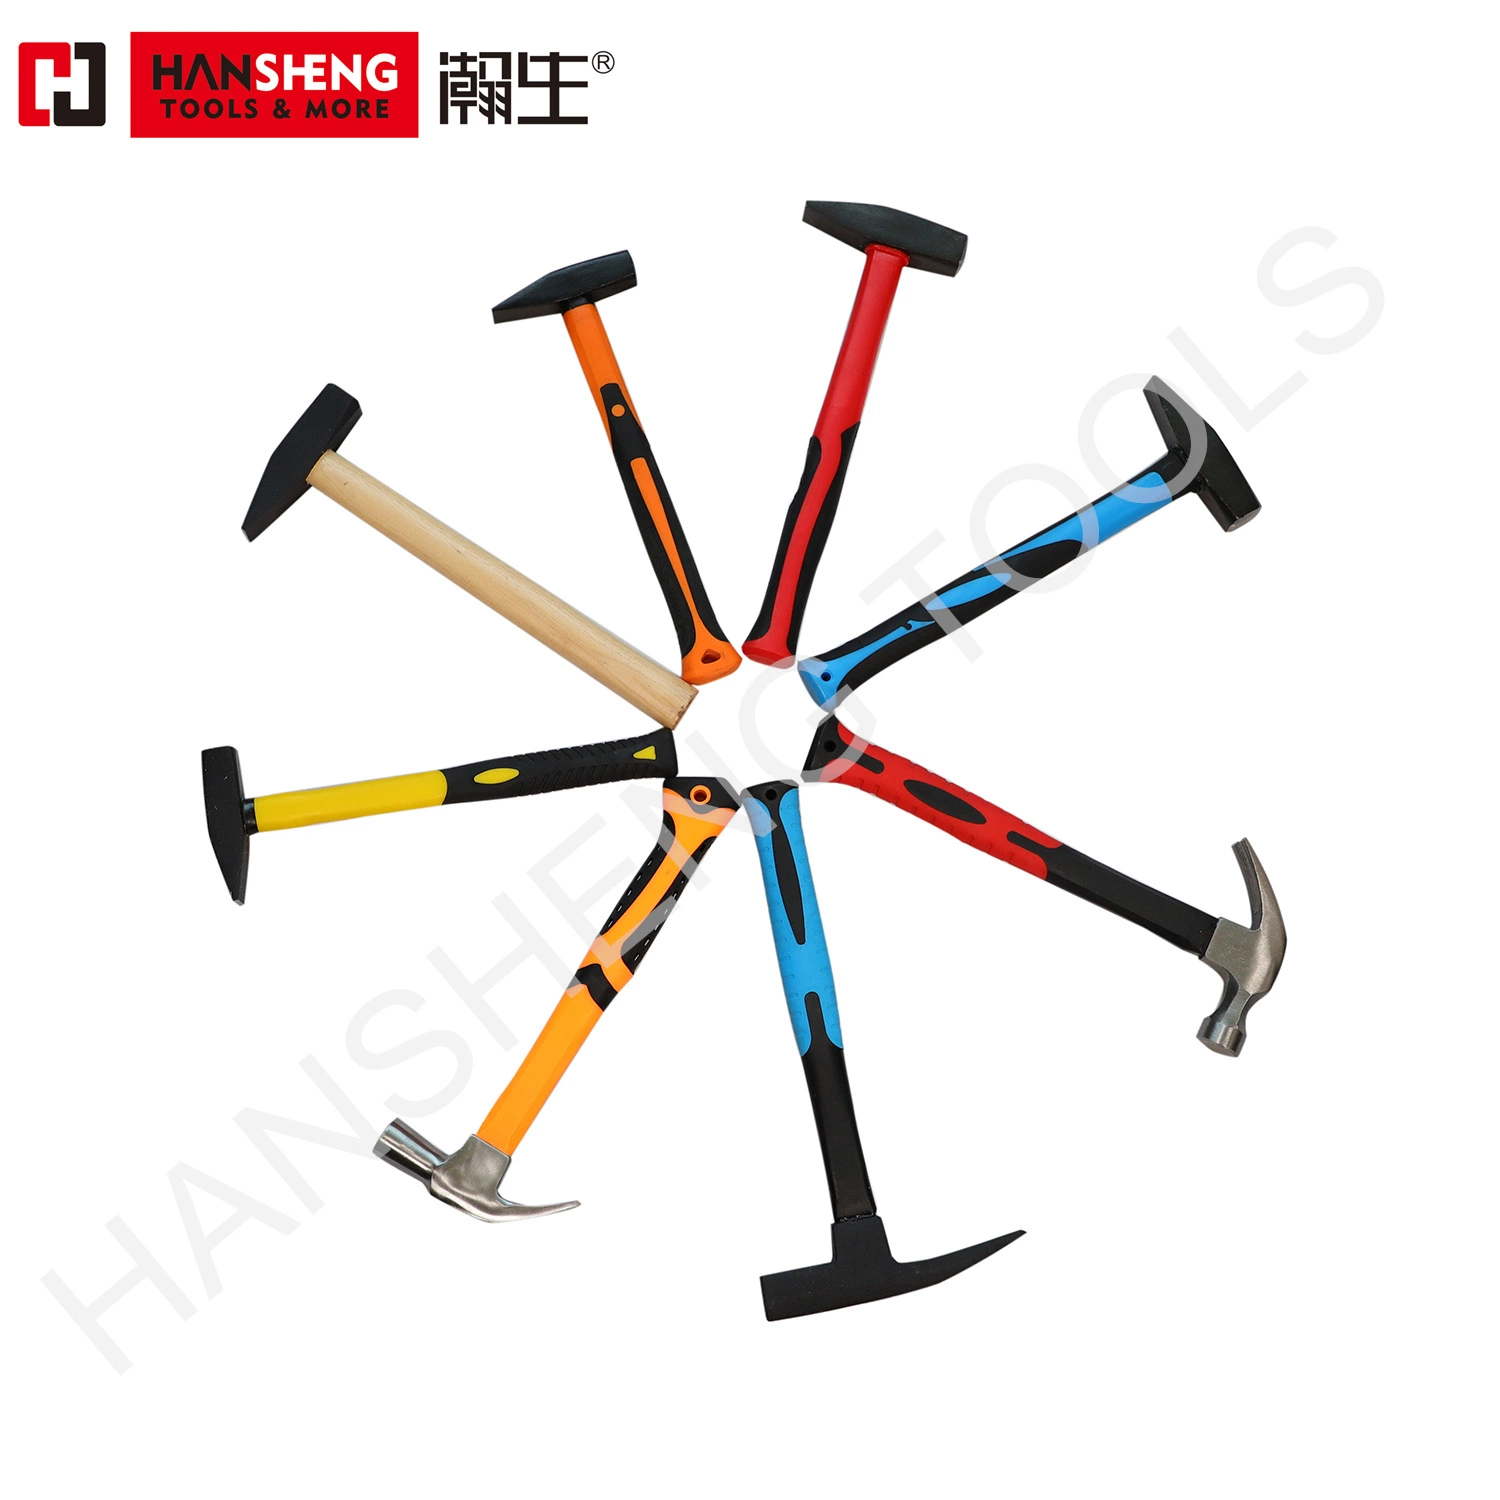 Professional Hardware Tool, Hand Tool, Made of Carbon Steel, PVC Handle, Machinist Hammer, Rubber Hammer, Claw Hammer, Bricklaye